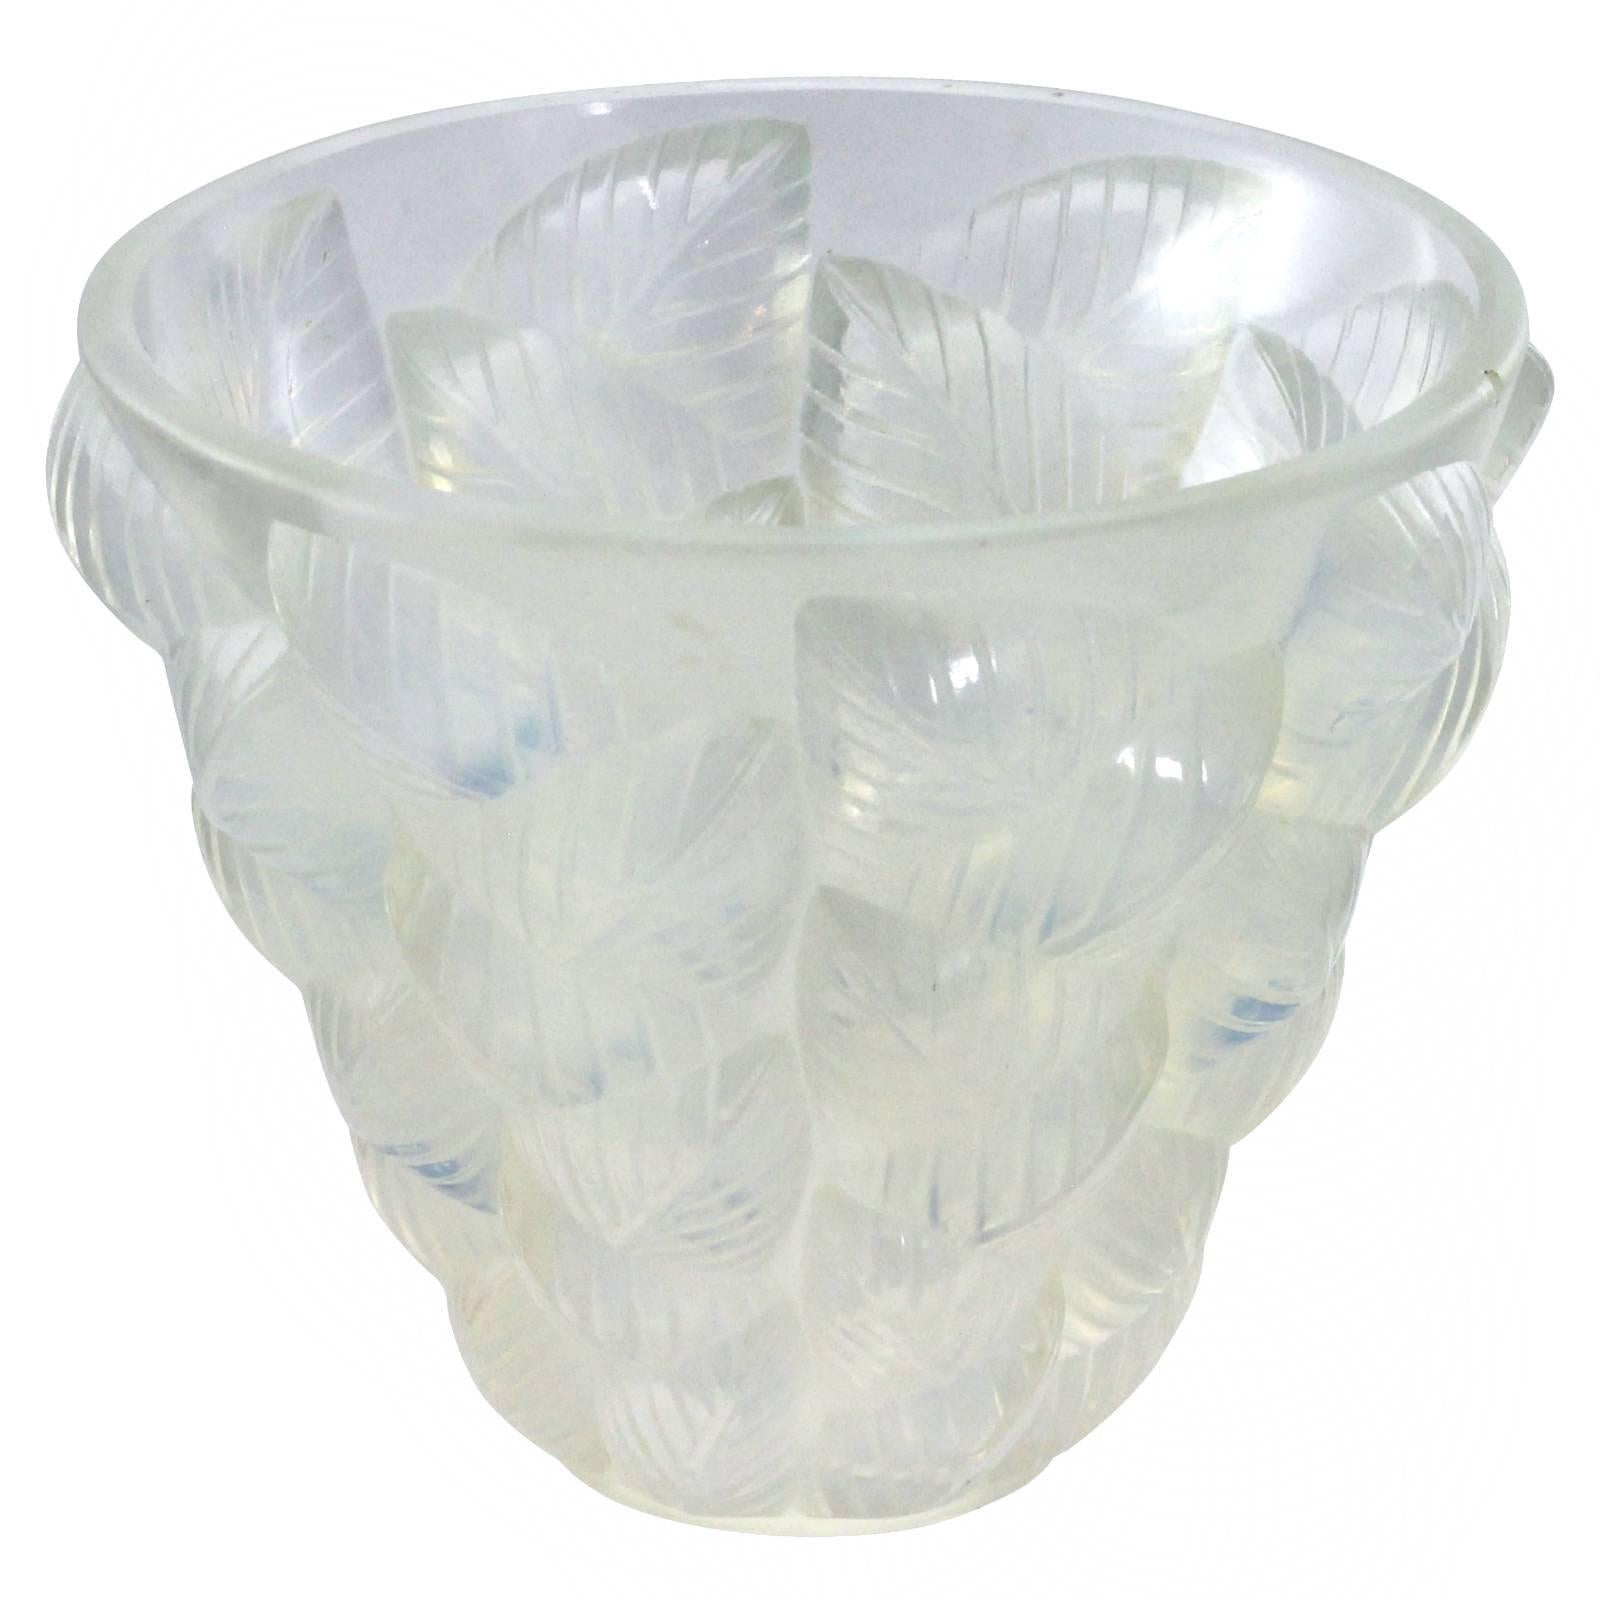 Early 20th Century Art Deco 'Moissac' Opalescent Glass Vase by René Lalique For Sale 1